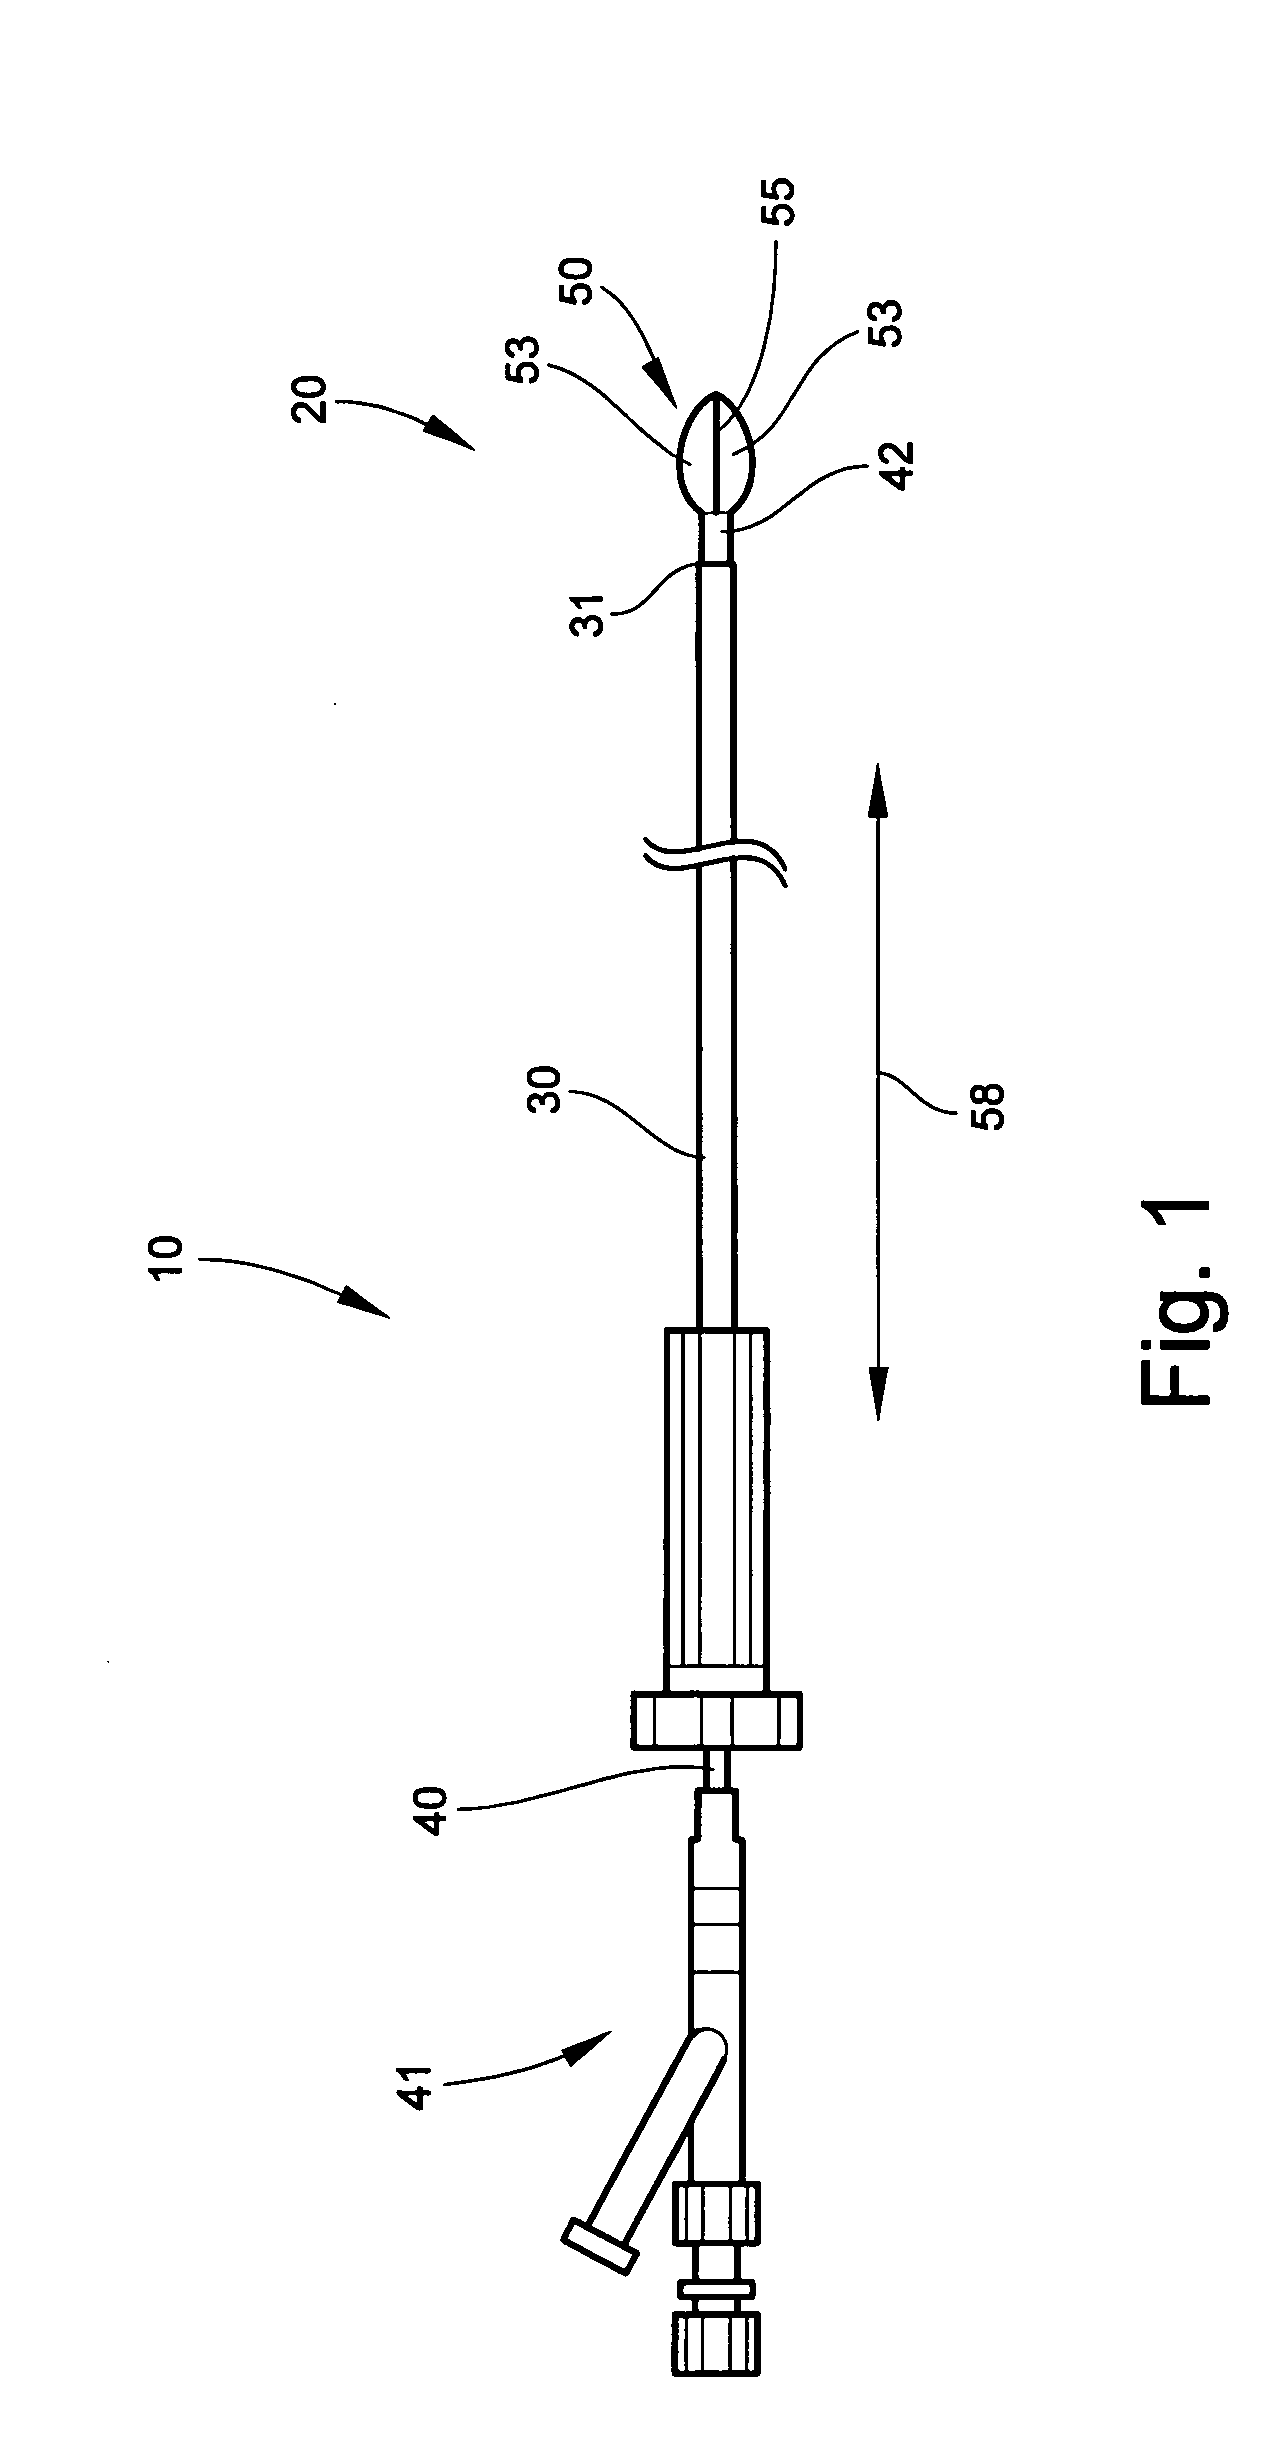 Directionally controlled expandable device and methods for use